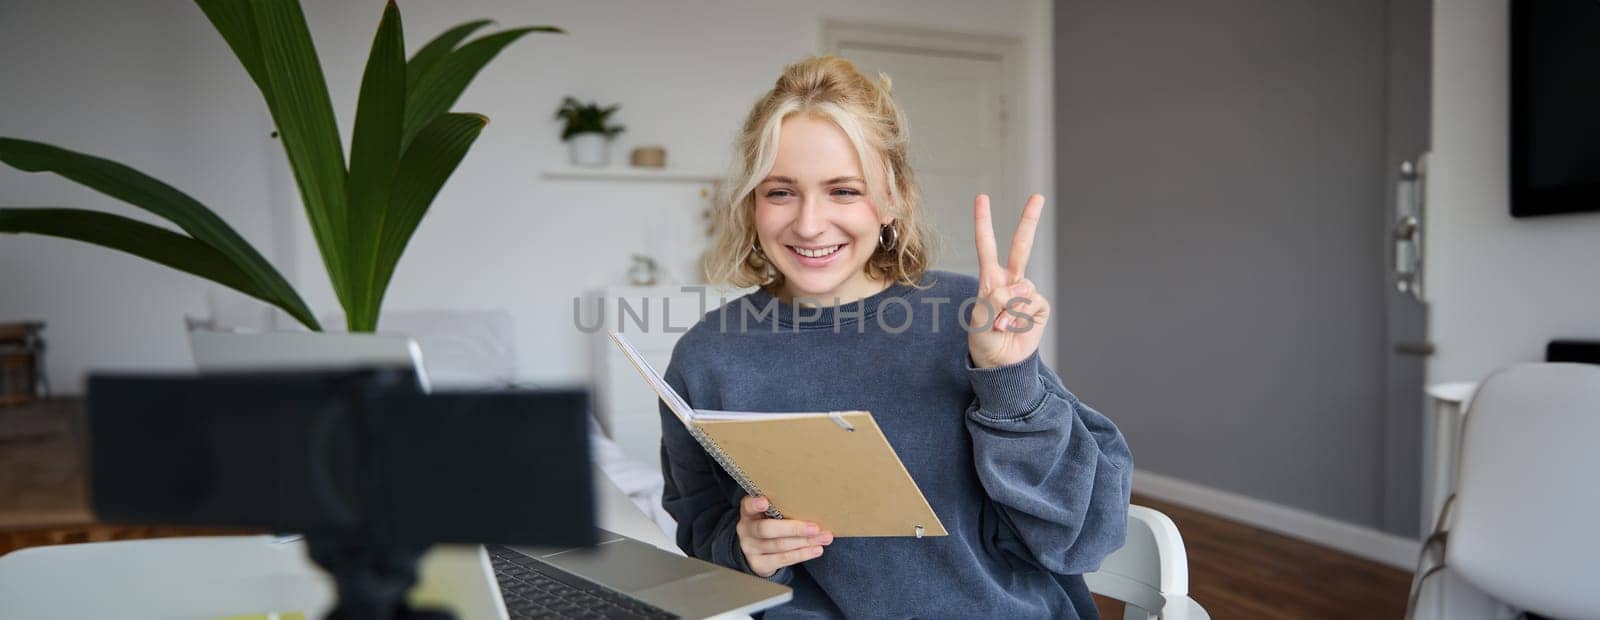 Image of smiling girl records video of herself on digital camera, shows peace sign, sits in front of laptop, holds notebook.